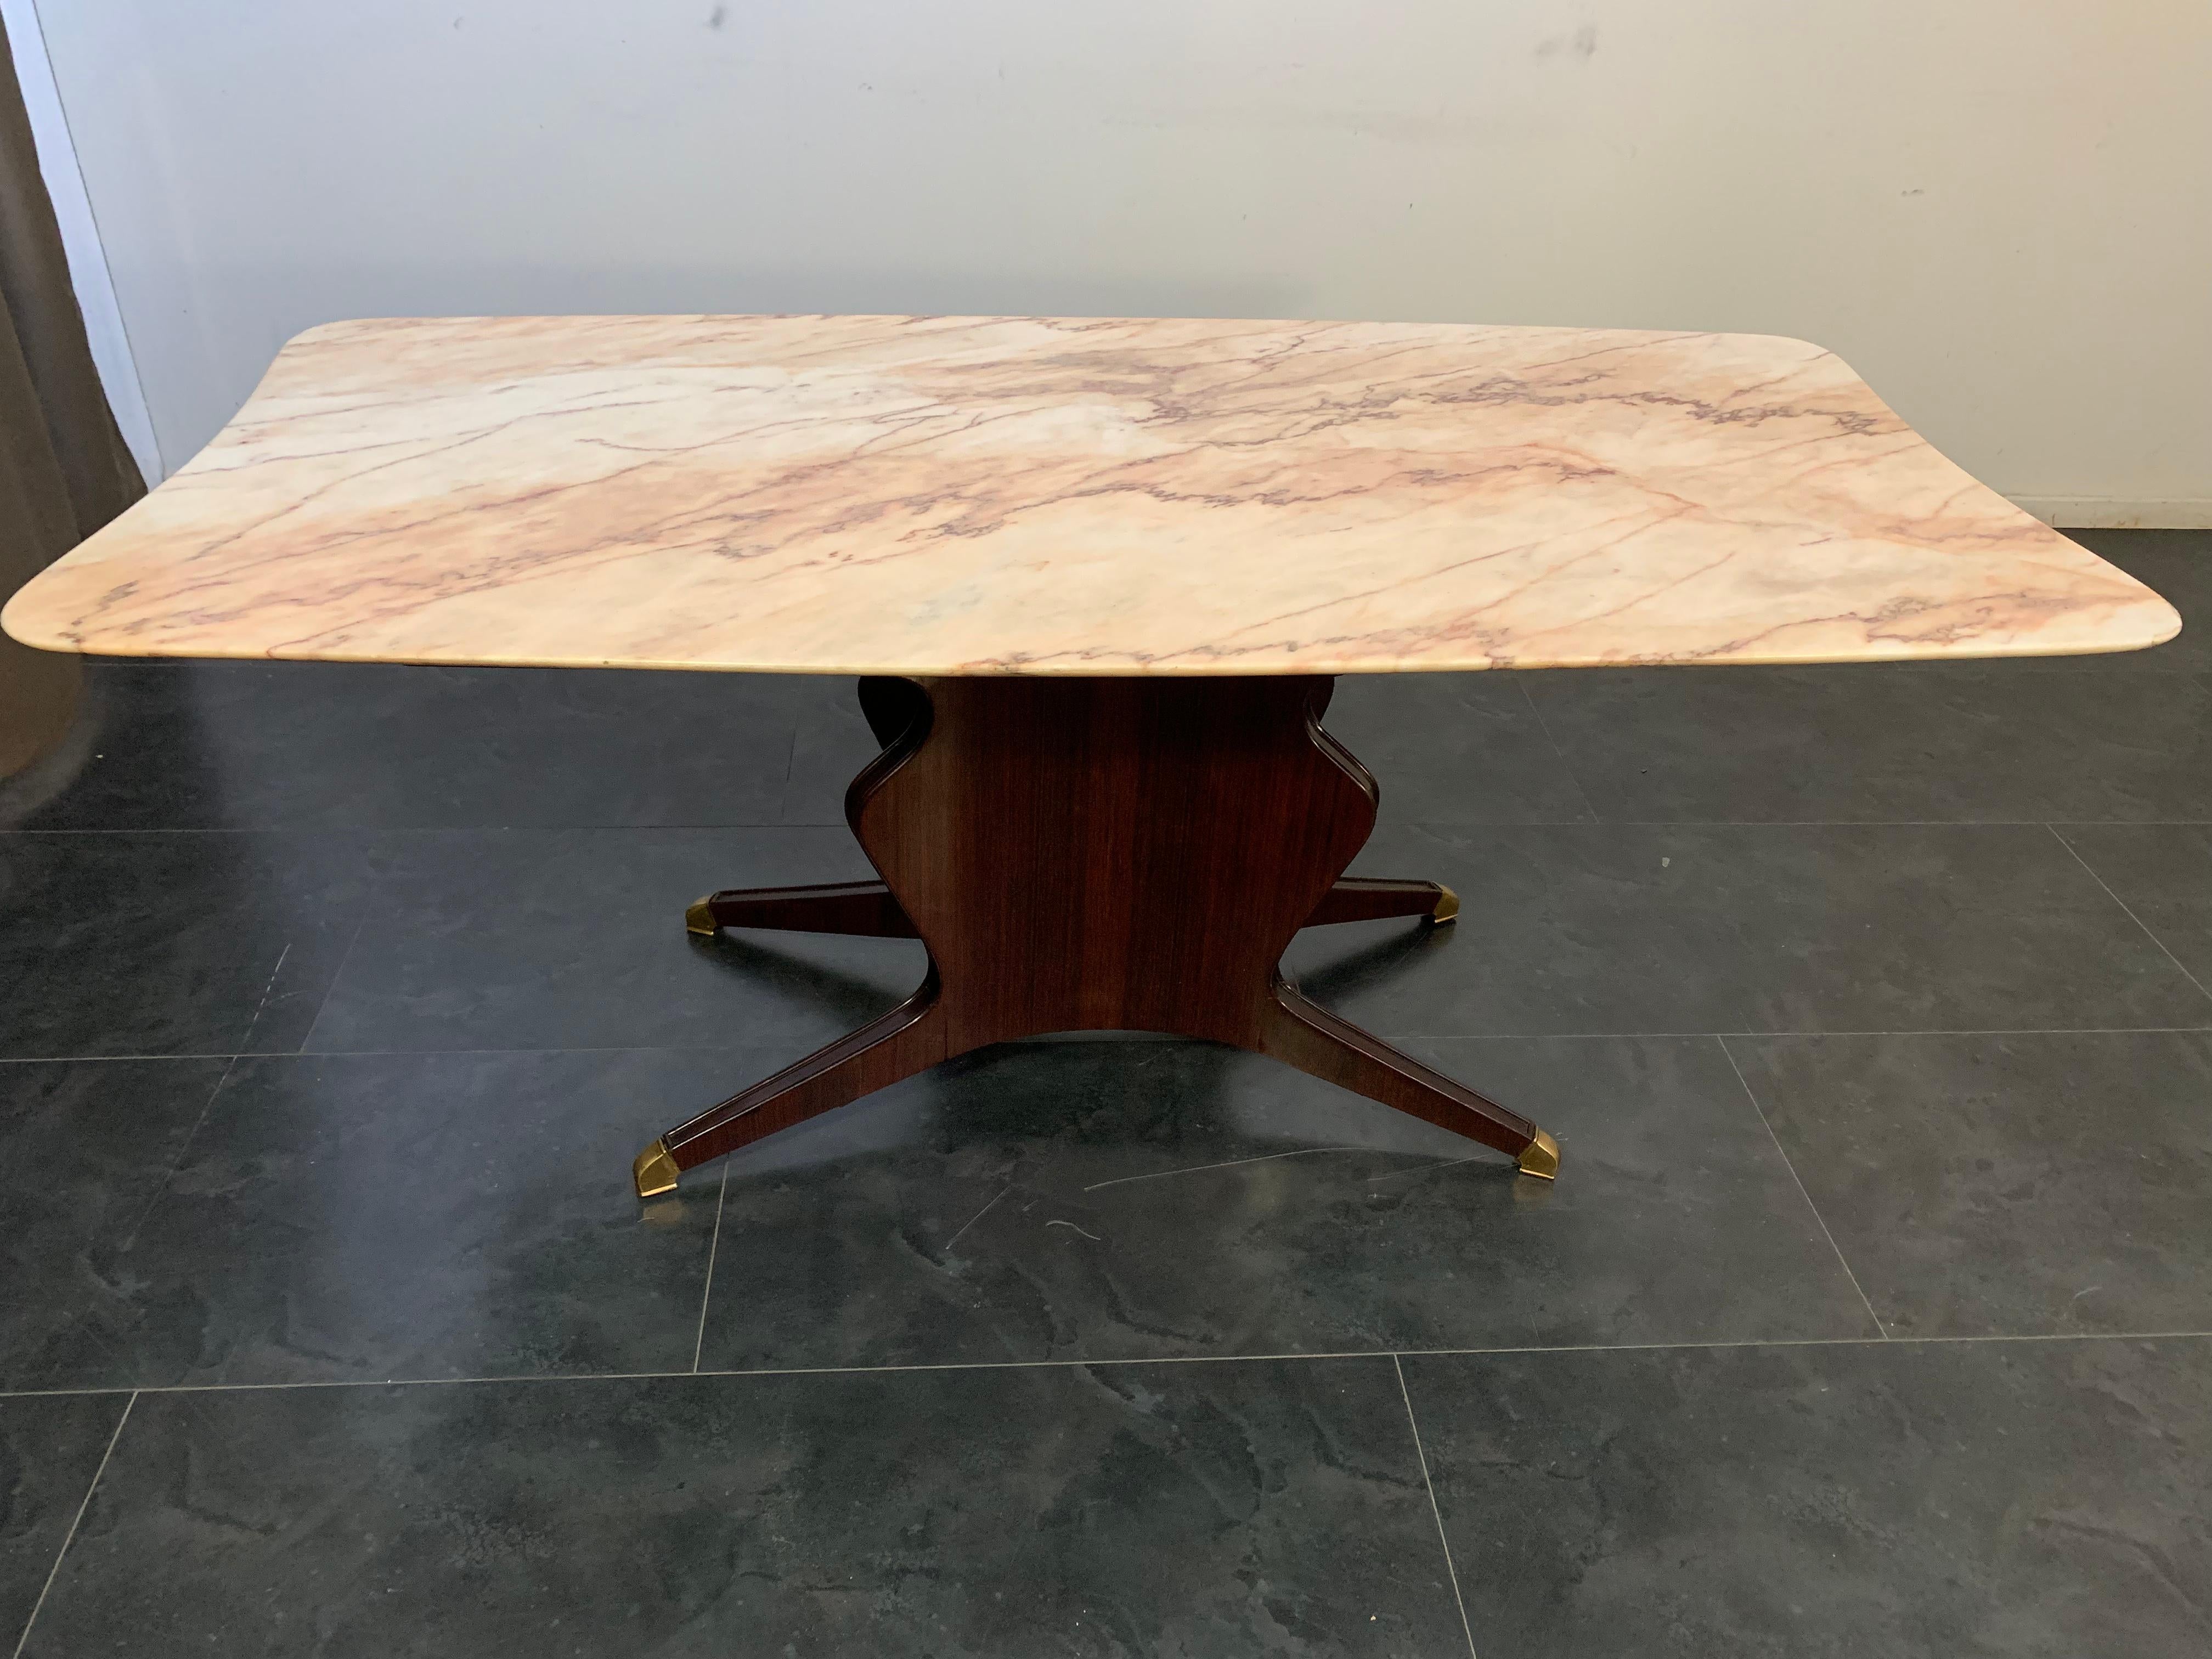 Table by Osvaldo Borsani in mahogany brass tips, top in Portugal pink marble selection. Under the top bears the label of the manufacturer, furniture manufacturer Turri brothers of Carugo.